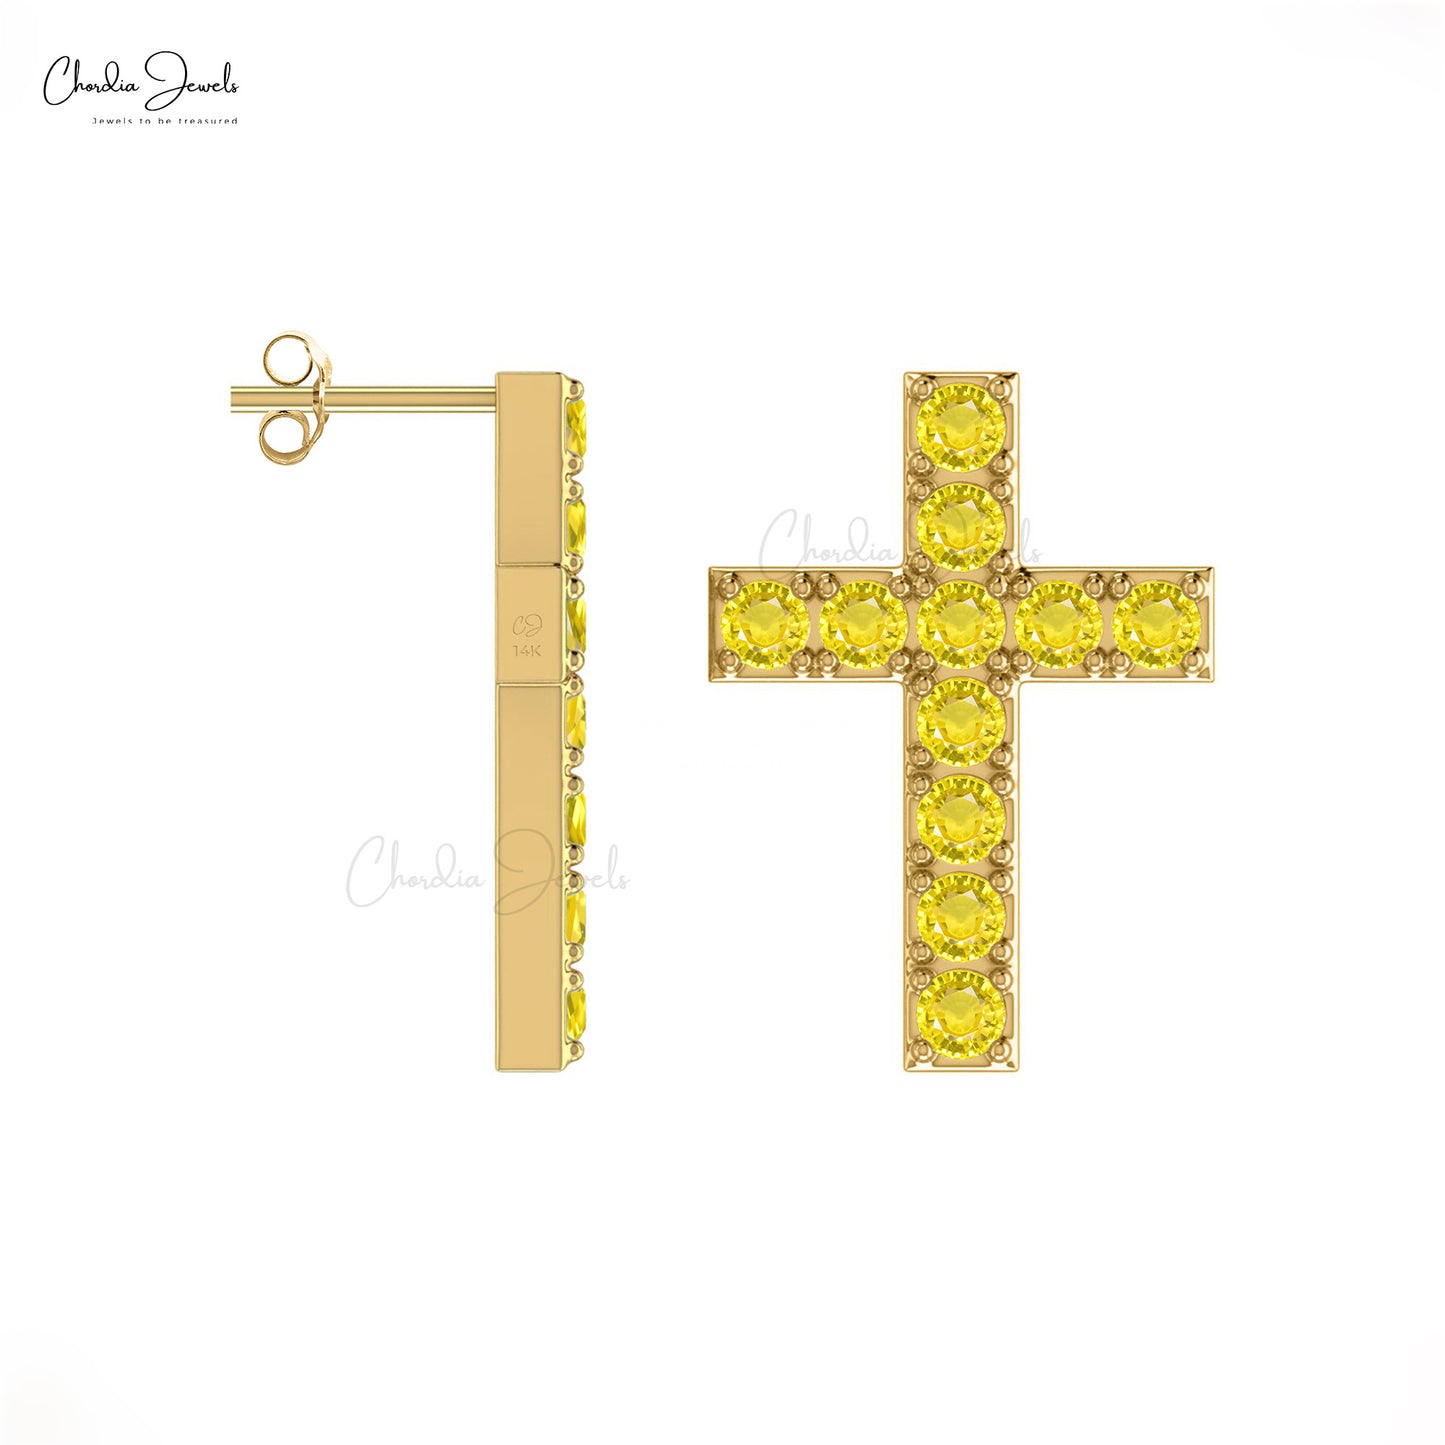 995 Pure 24K Gold Earrings with Green Color Stones for Women -  1-1-GER-V00622 in 5.250 Grams